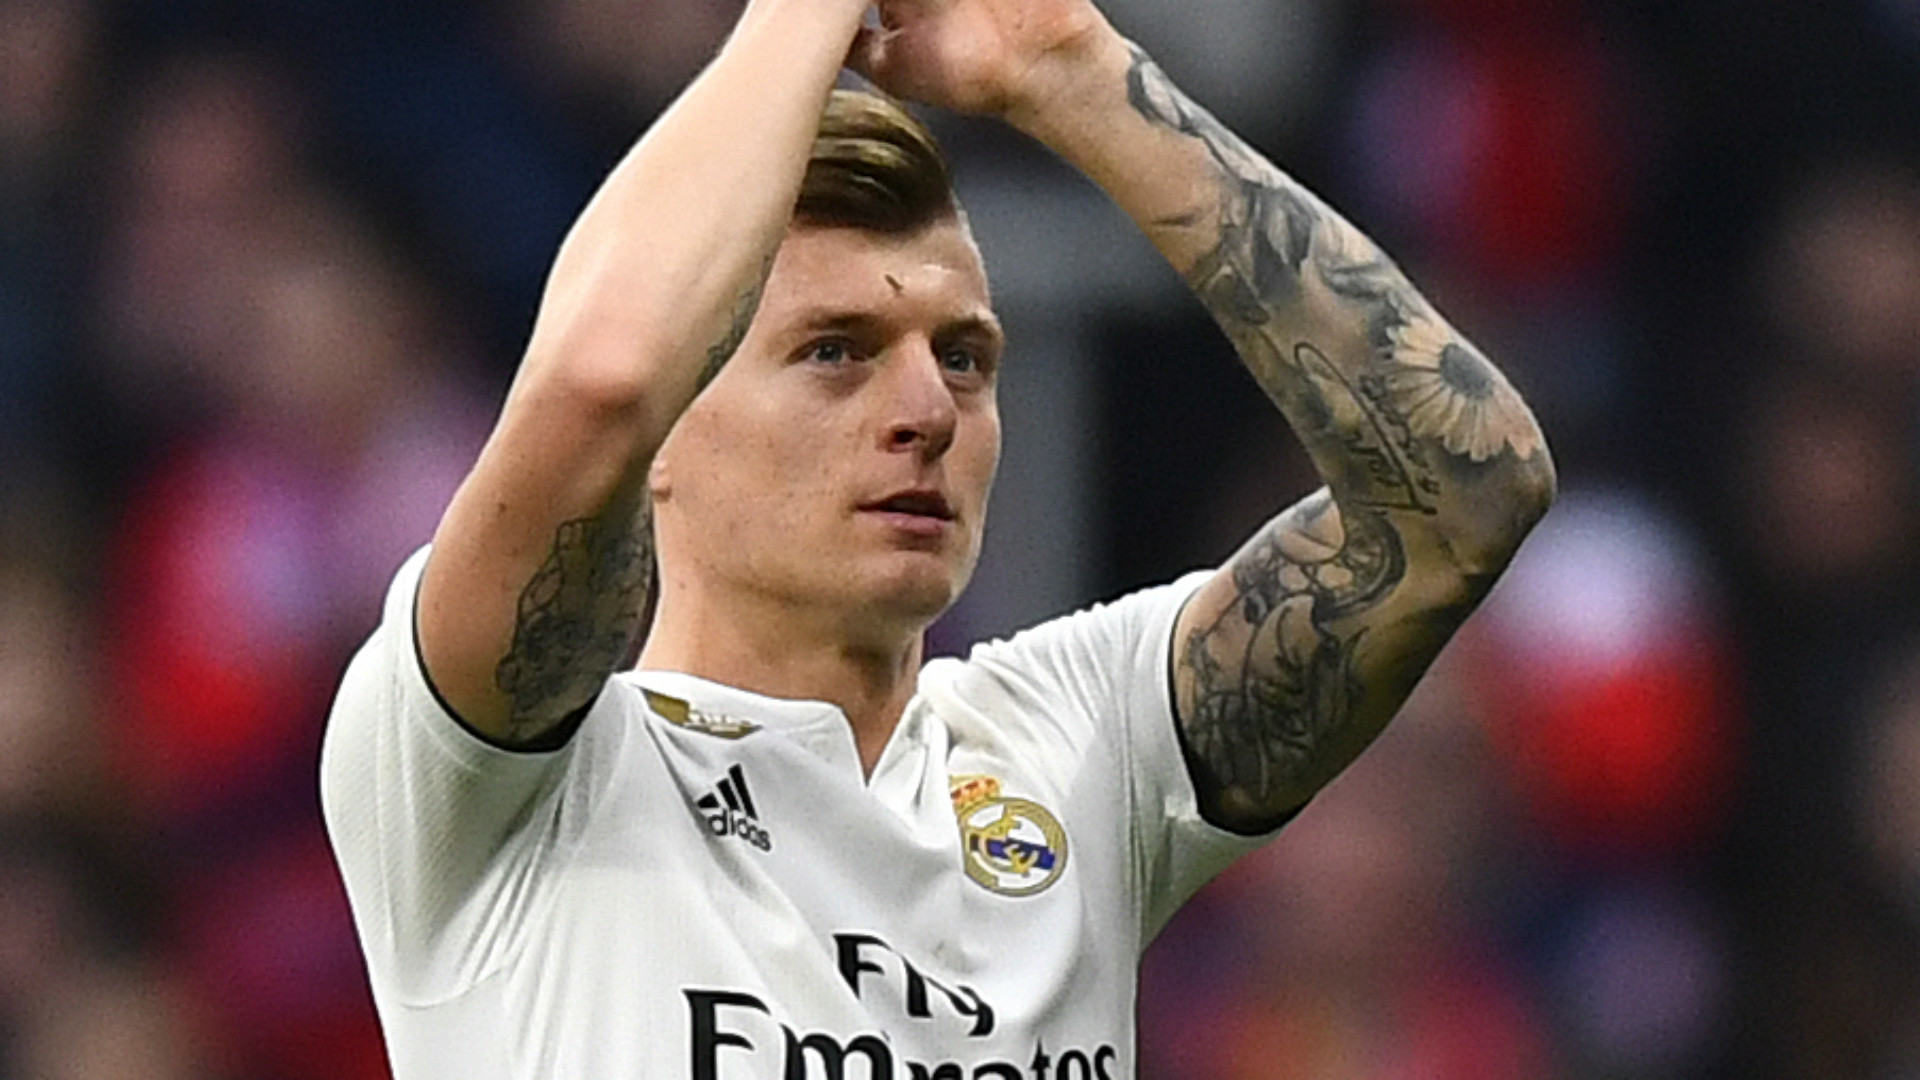 Real Madrid exclusive: Blanco always ready for Champions League run - Toni Kroos | Sporting News